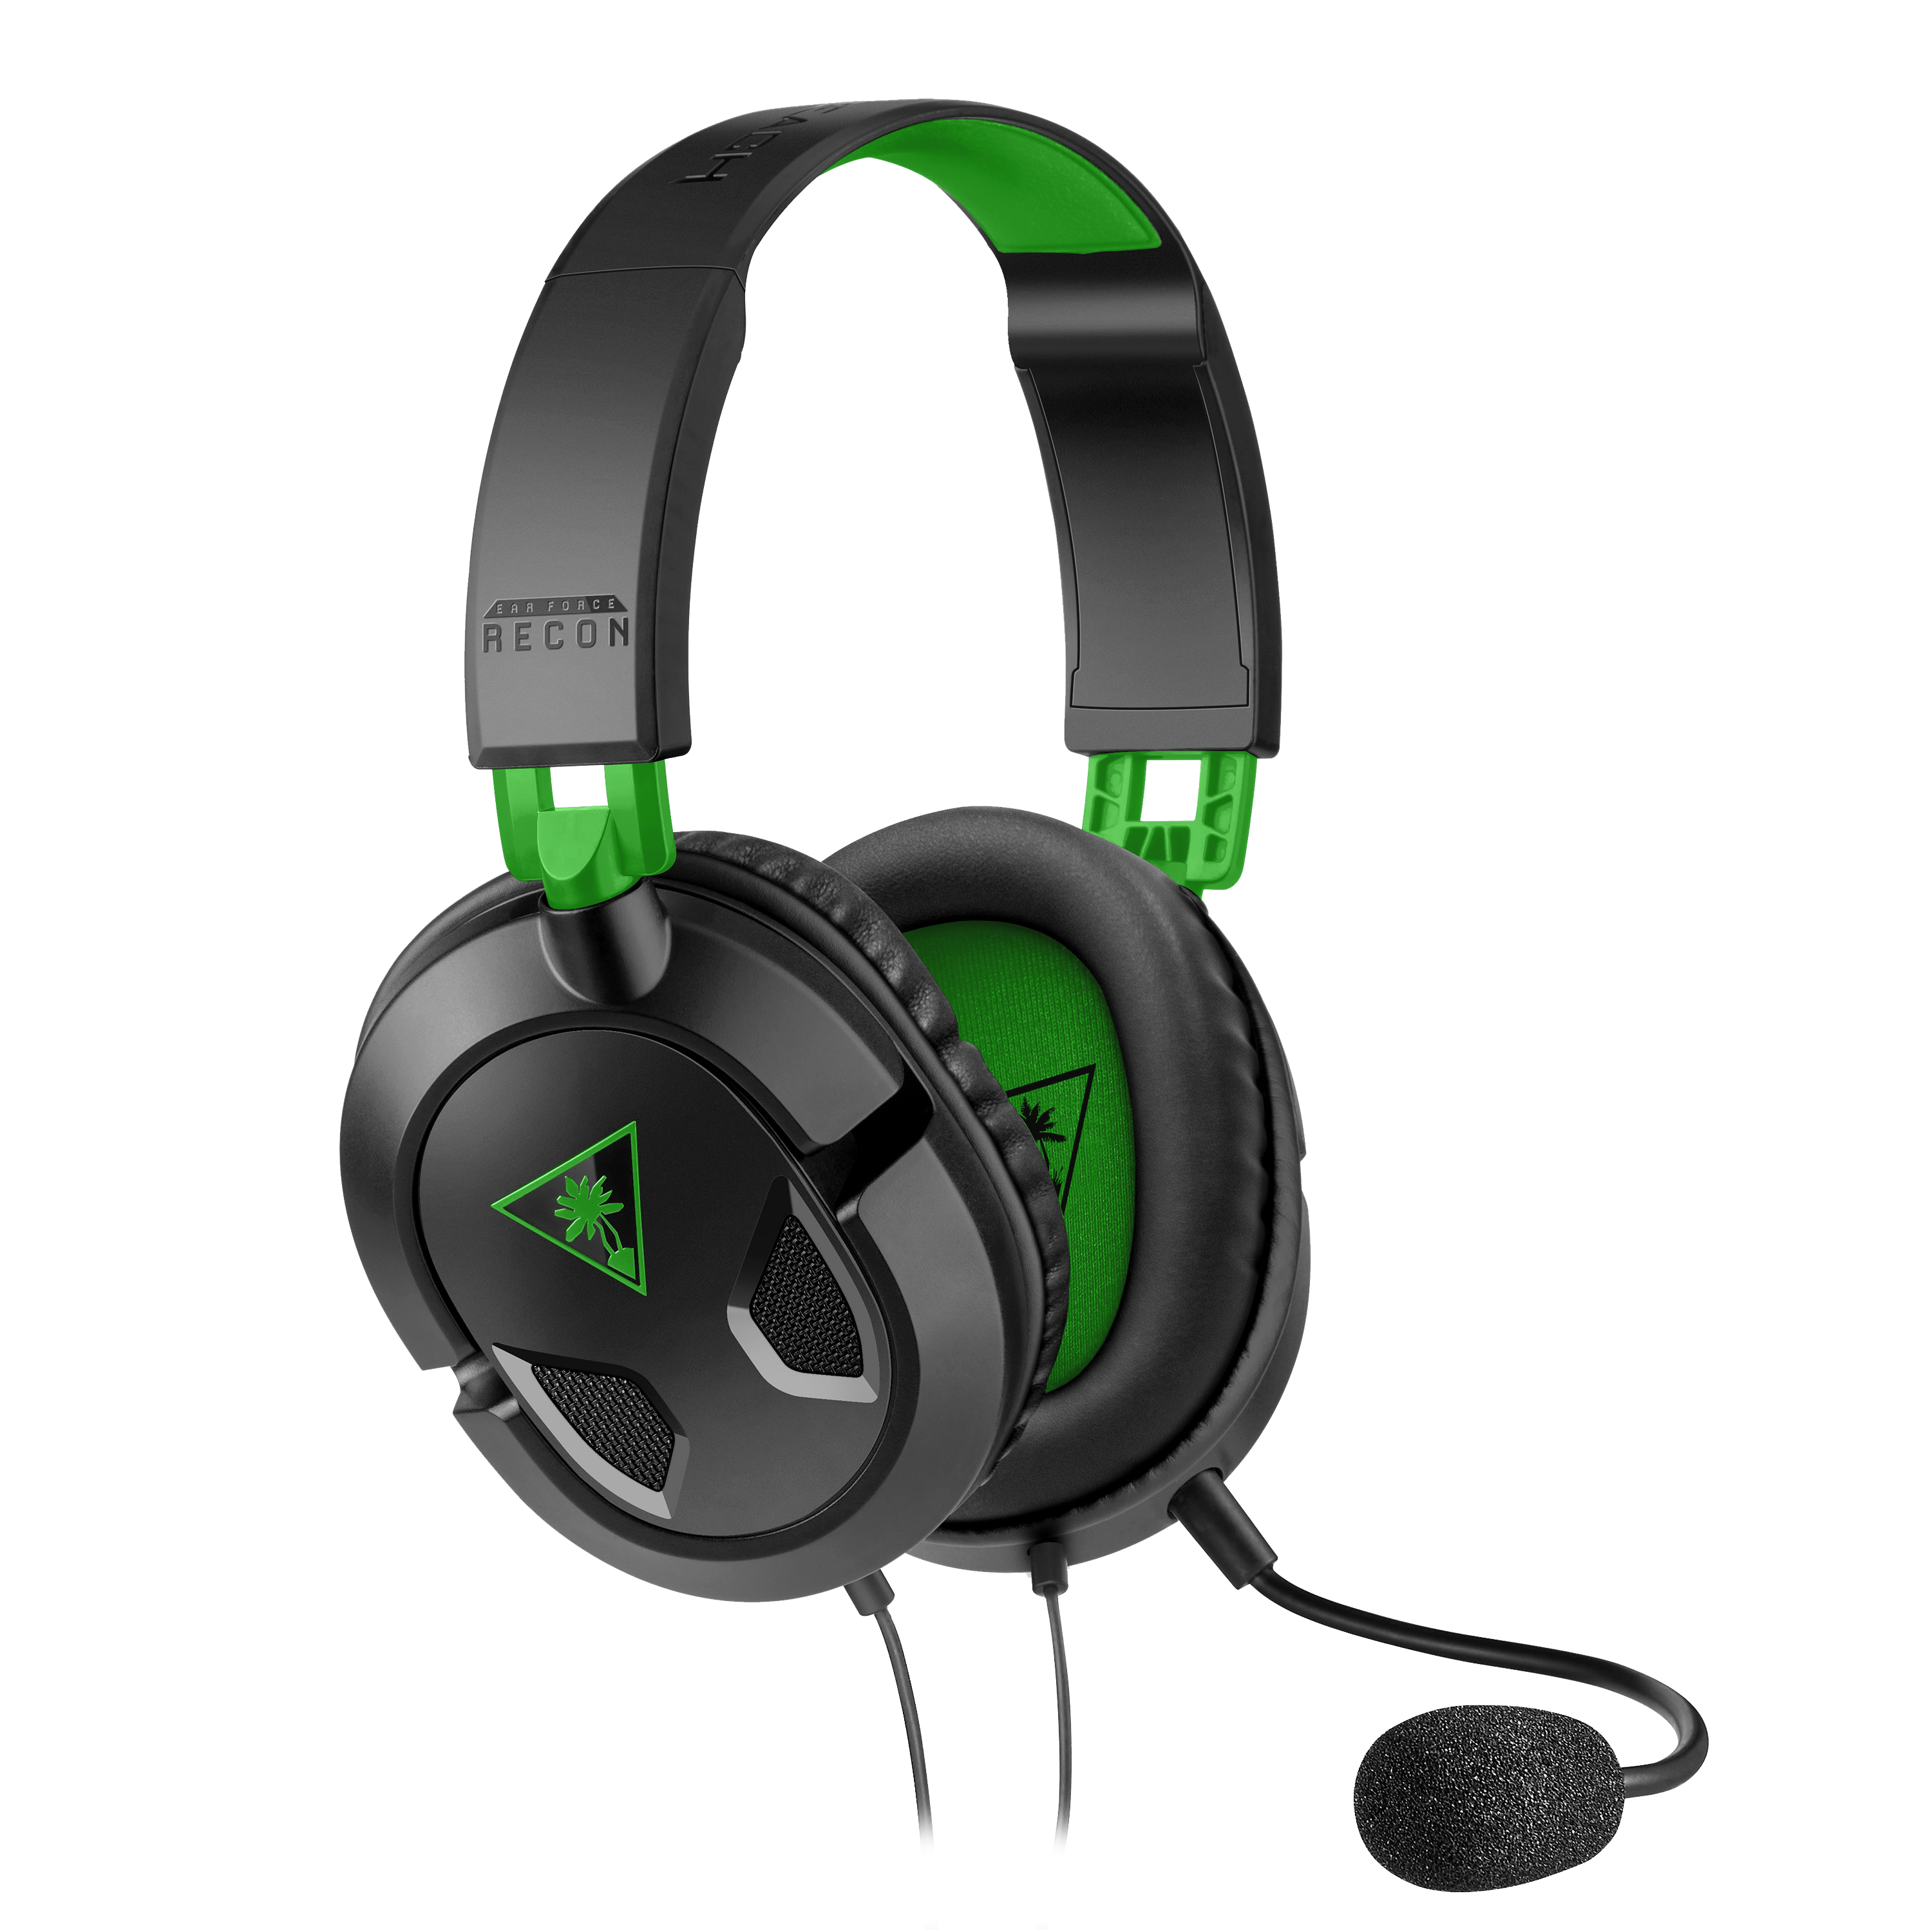 wireless headset compatible with xbox one and ps4